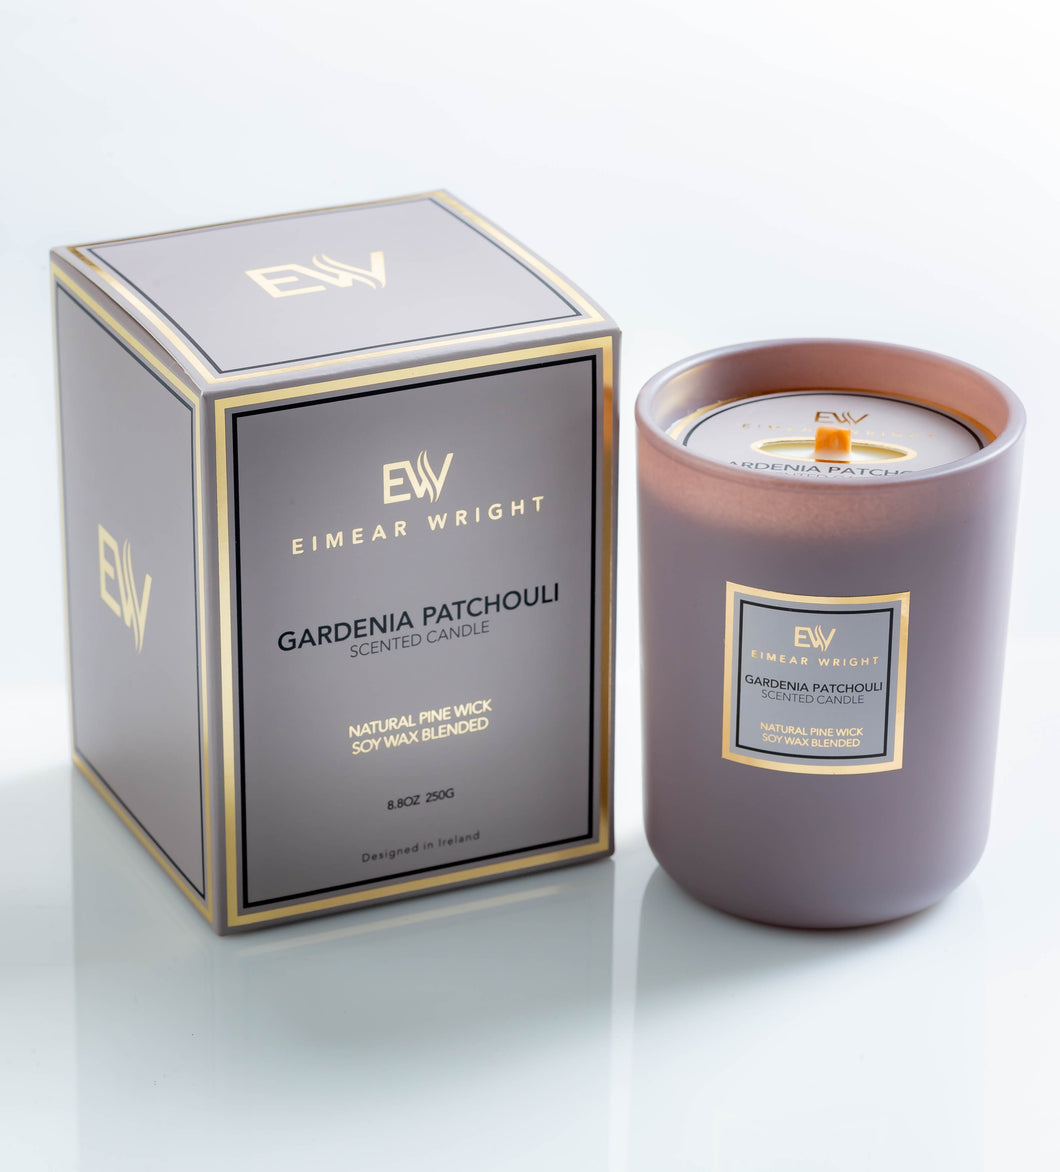 Eimear Wright Gardenia Patchouli Candle 250g - Gallaghers on the Green